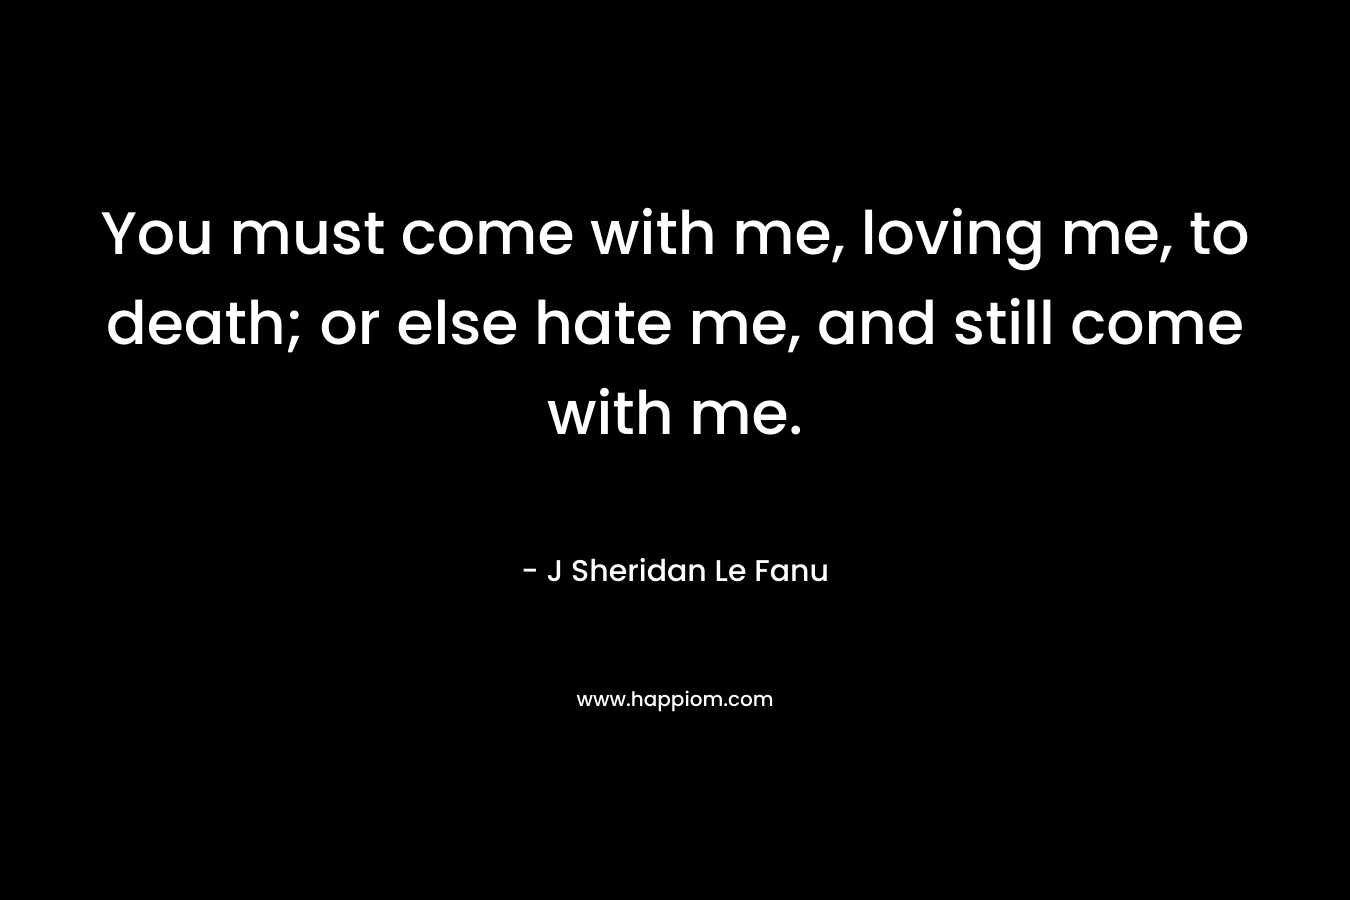 You must come with me, loving me, to death; or else hate me, and still come with me. – J Sheridan Le Fanu